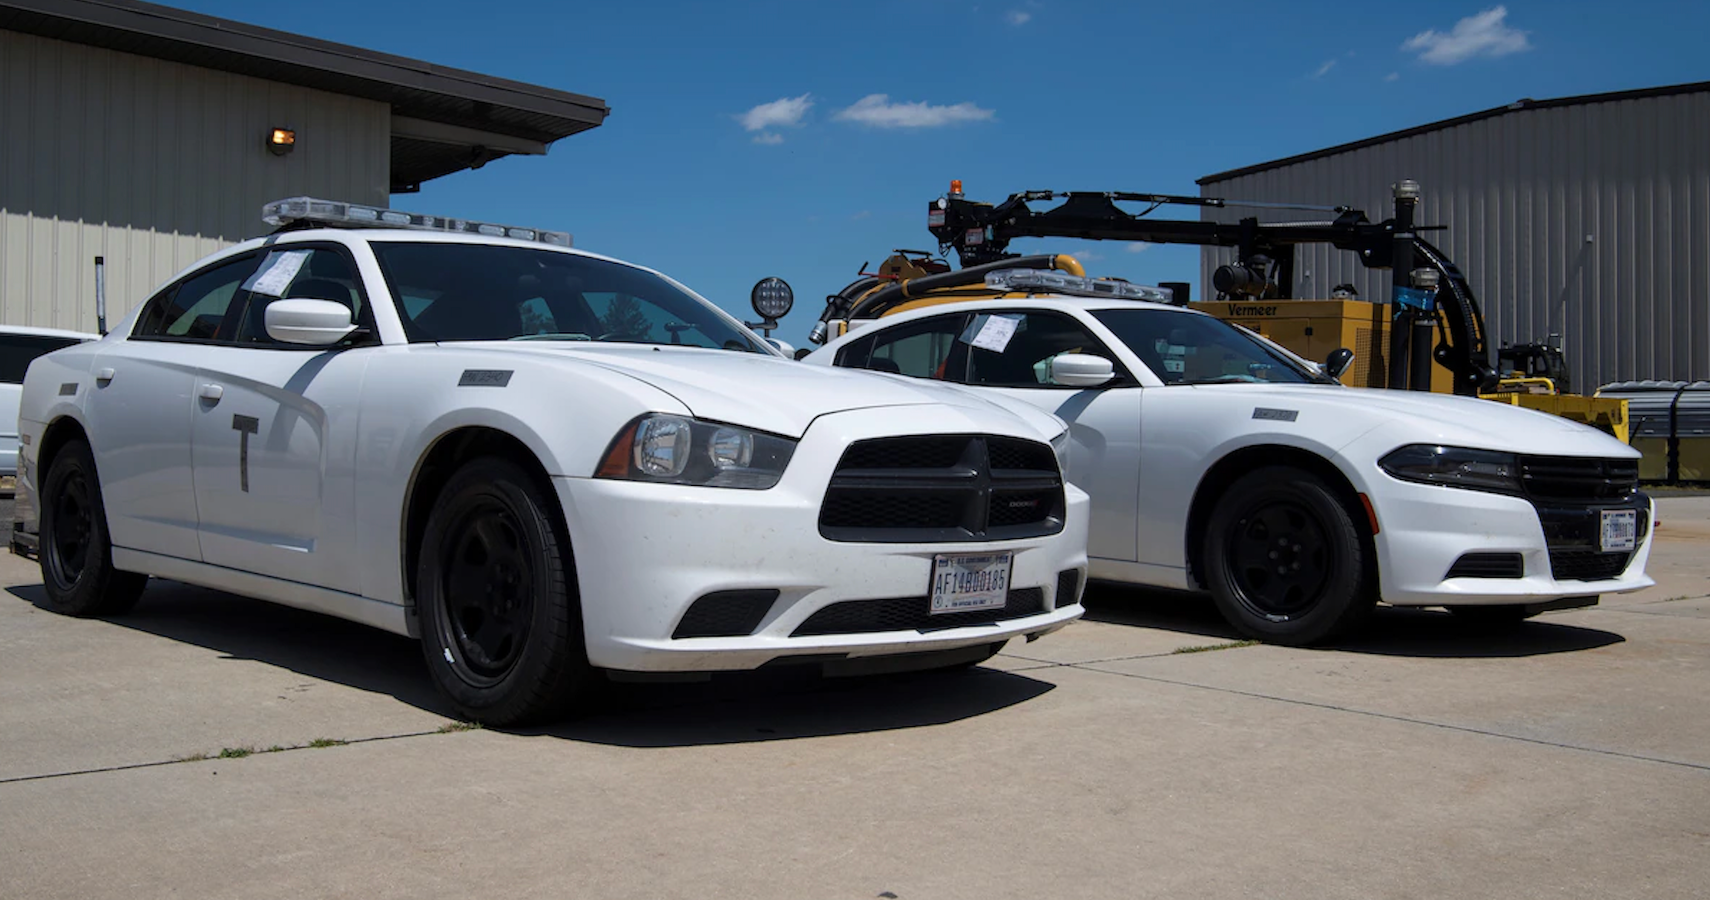 Two white Dodge Chargers parked side by side